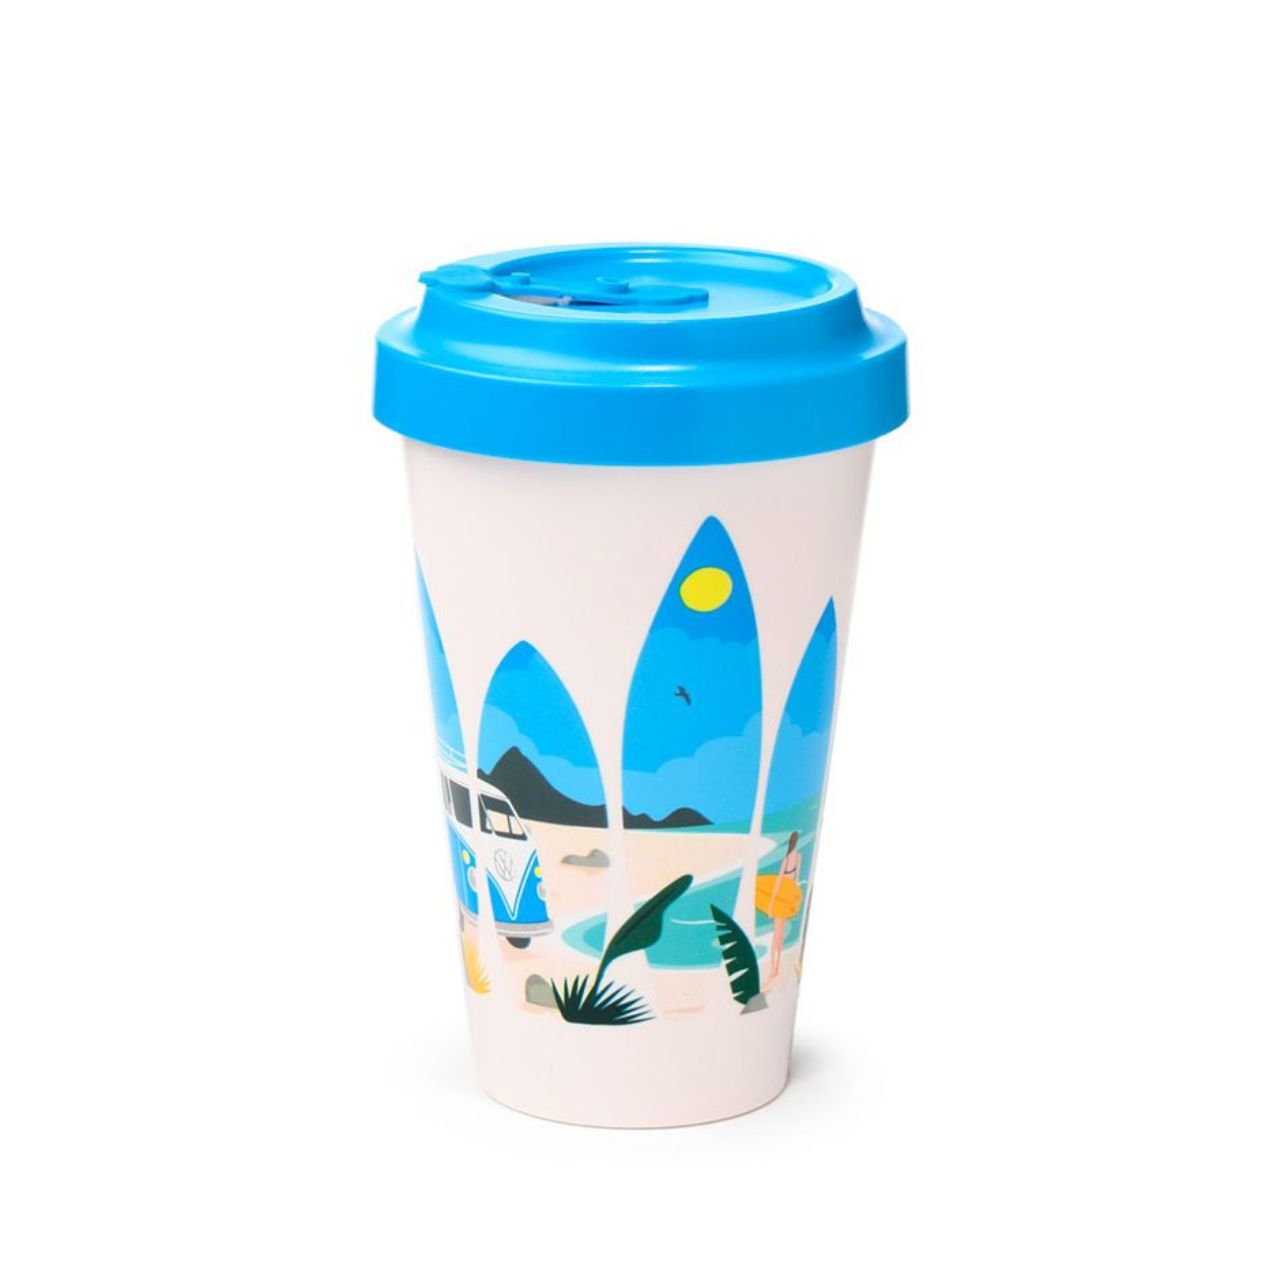 This Volkswagen VW T1 Camper Bus Waves are Calling Travel Mug holds 400ml of your favorite beverage. Its iconic design will transport you to days of carefree travel. Made from durable materials, it is perfect for both adventures and everyday life. Take a sip and hit the road!